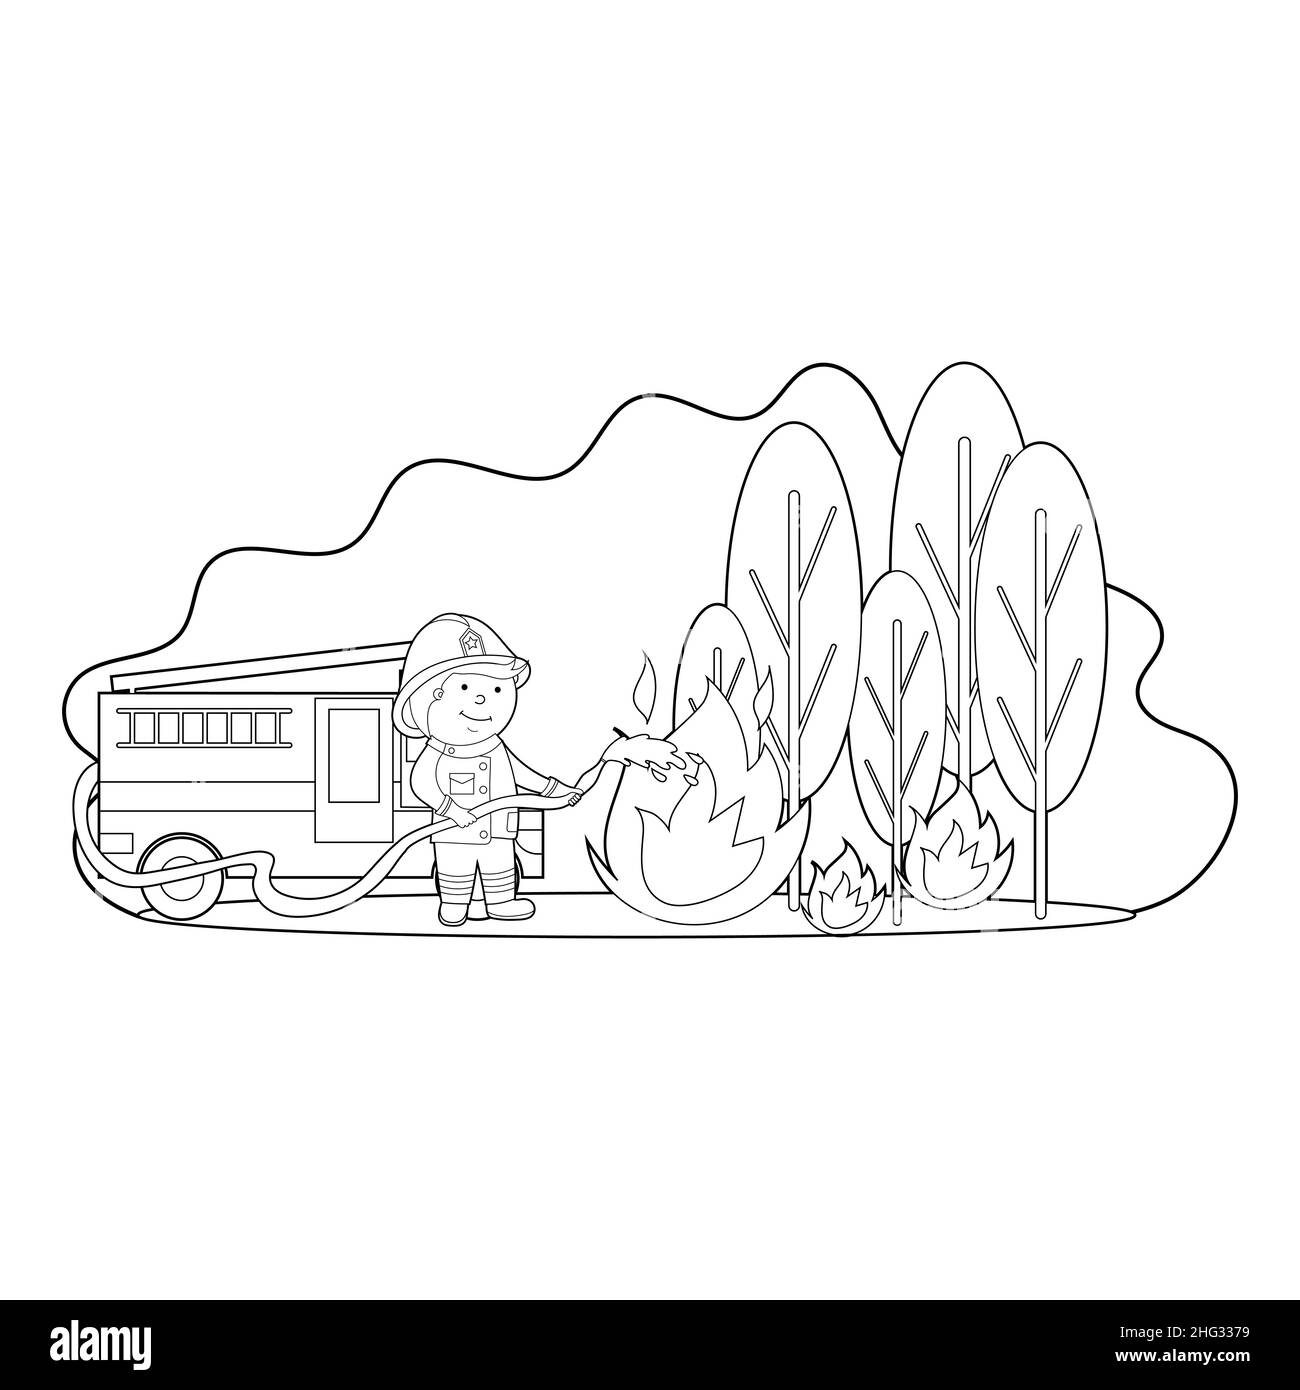 coloring book, color a cartoon illustration of a firefighter extinguishing a forest fire, vector Stock Vector